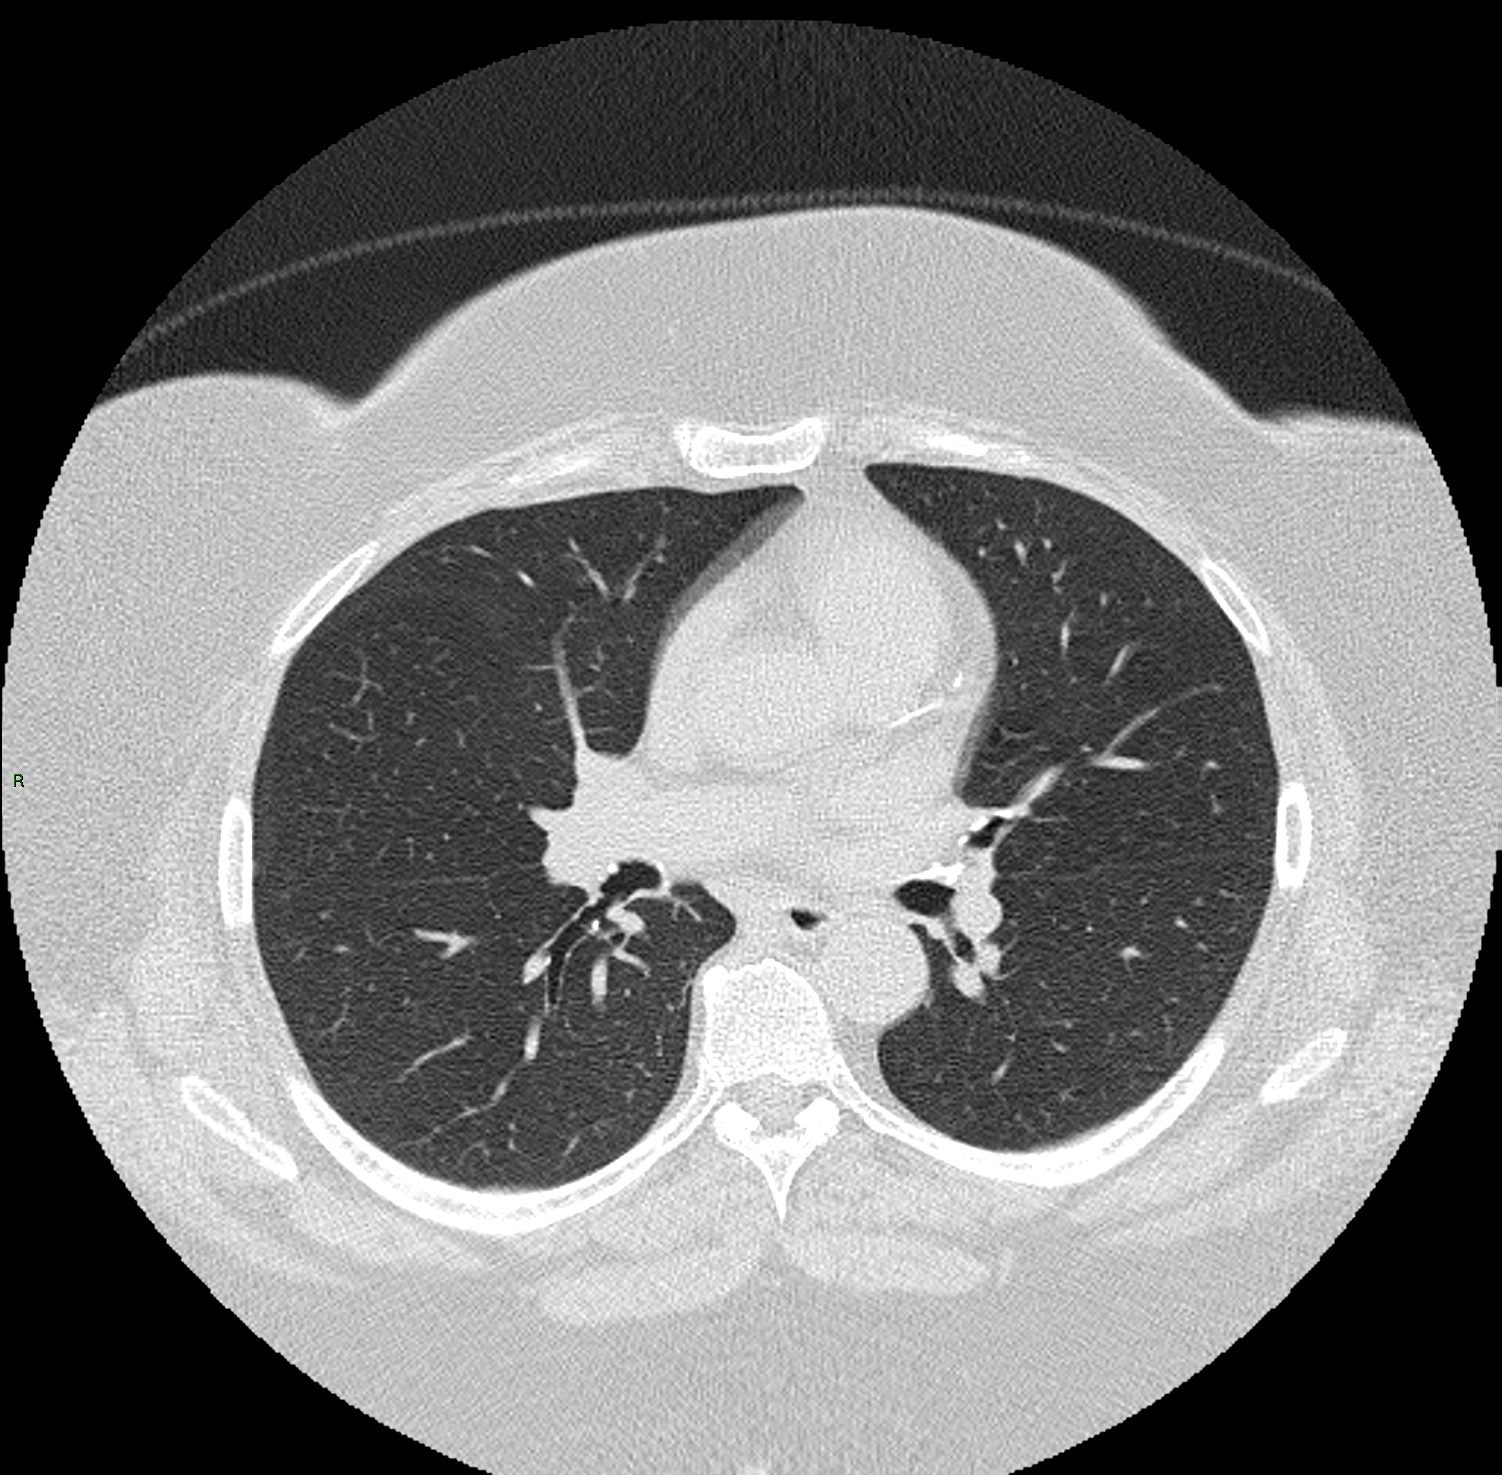 A chest CT scan is just one of the images that will be used in the new research tool.